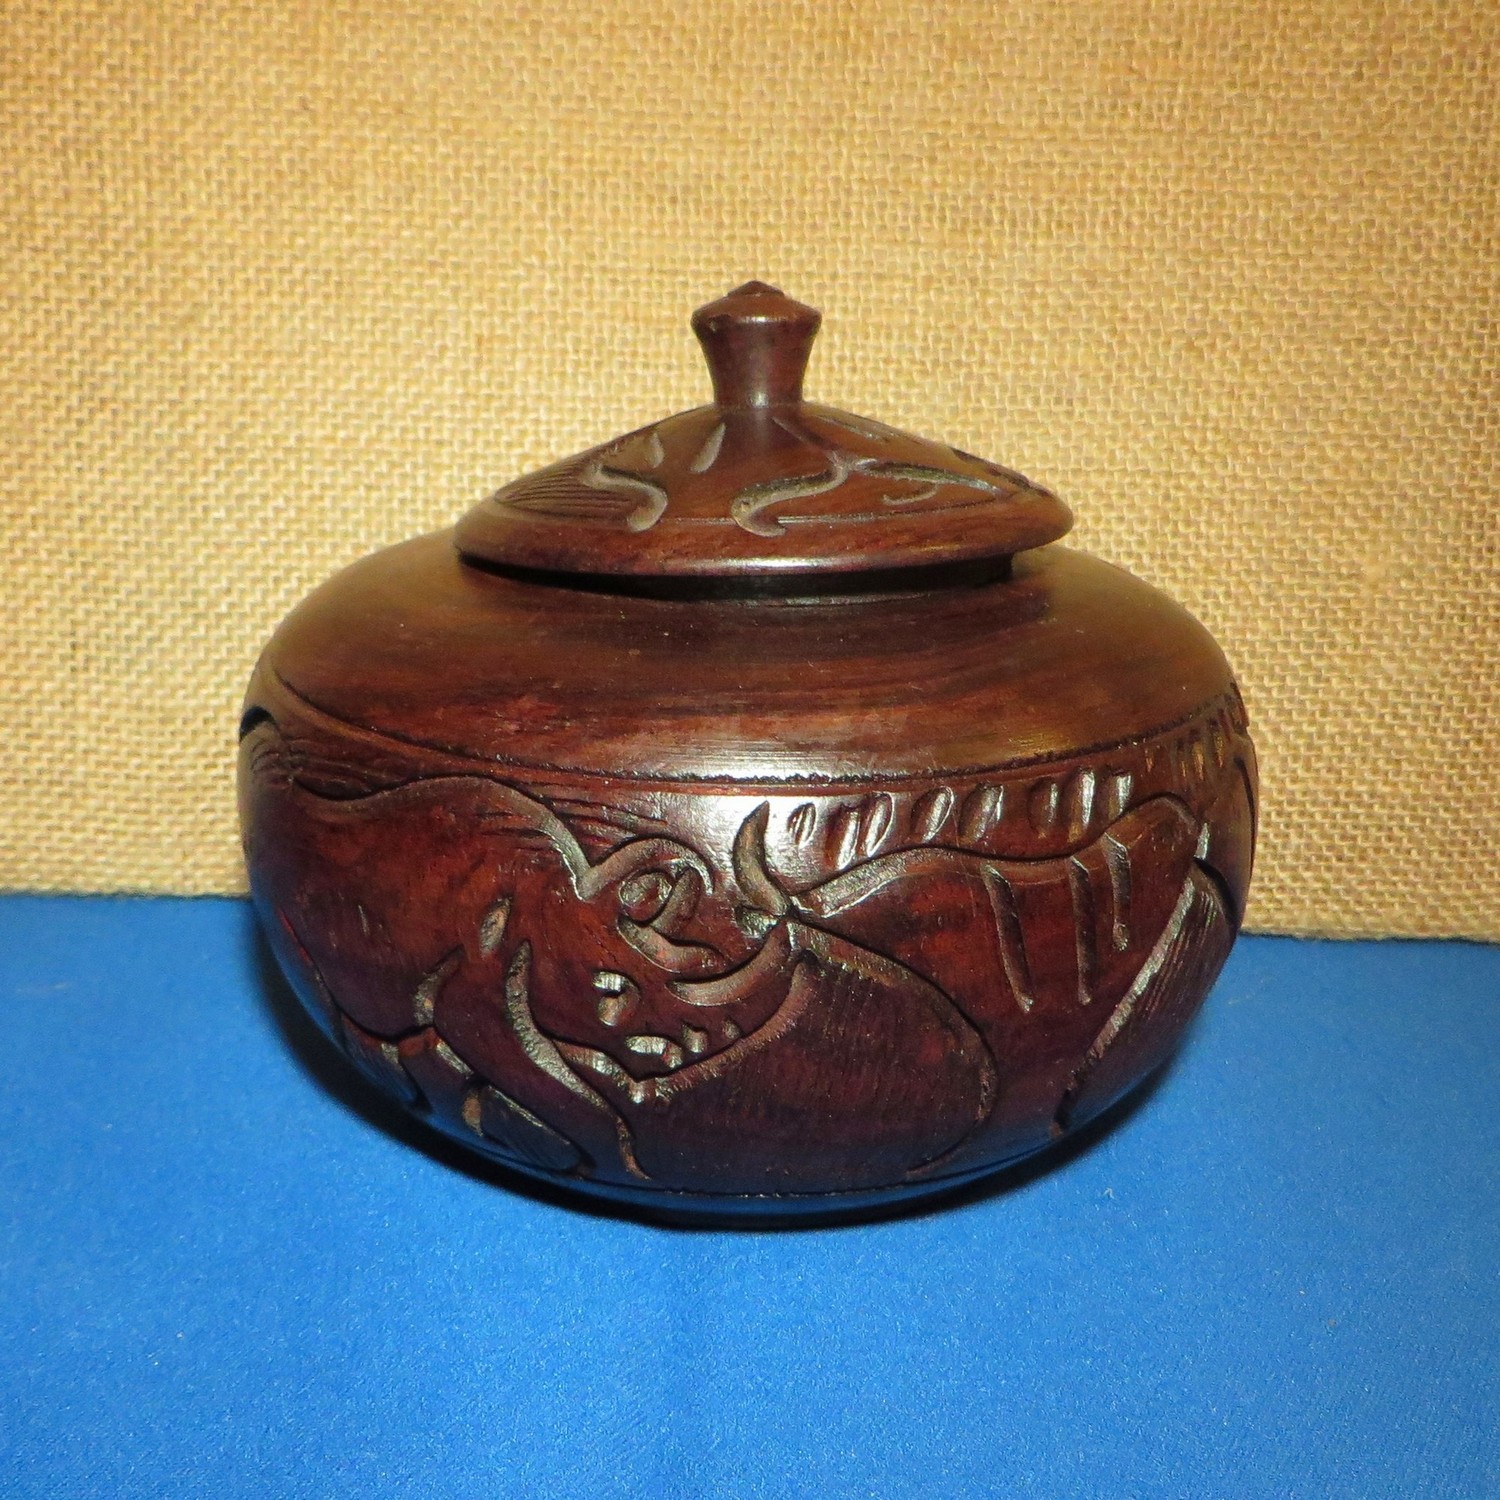 Medium Hand Carved Wood Bowl With Lid, Carved Wooden Bowl With Lid